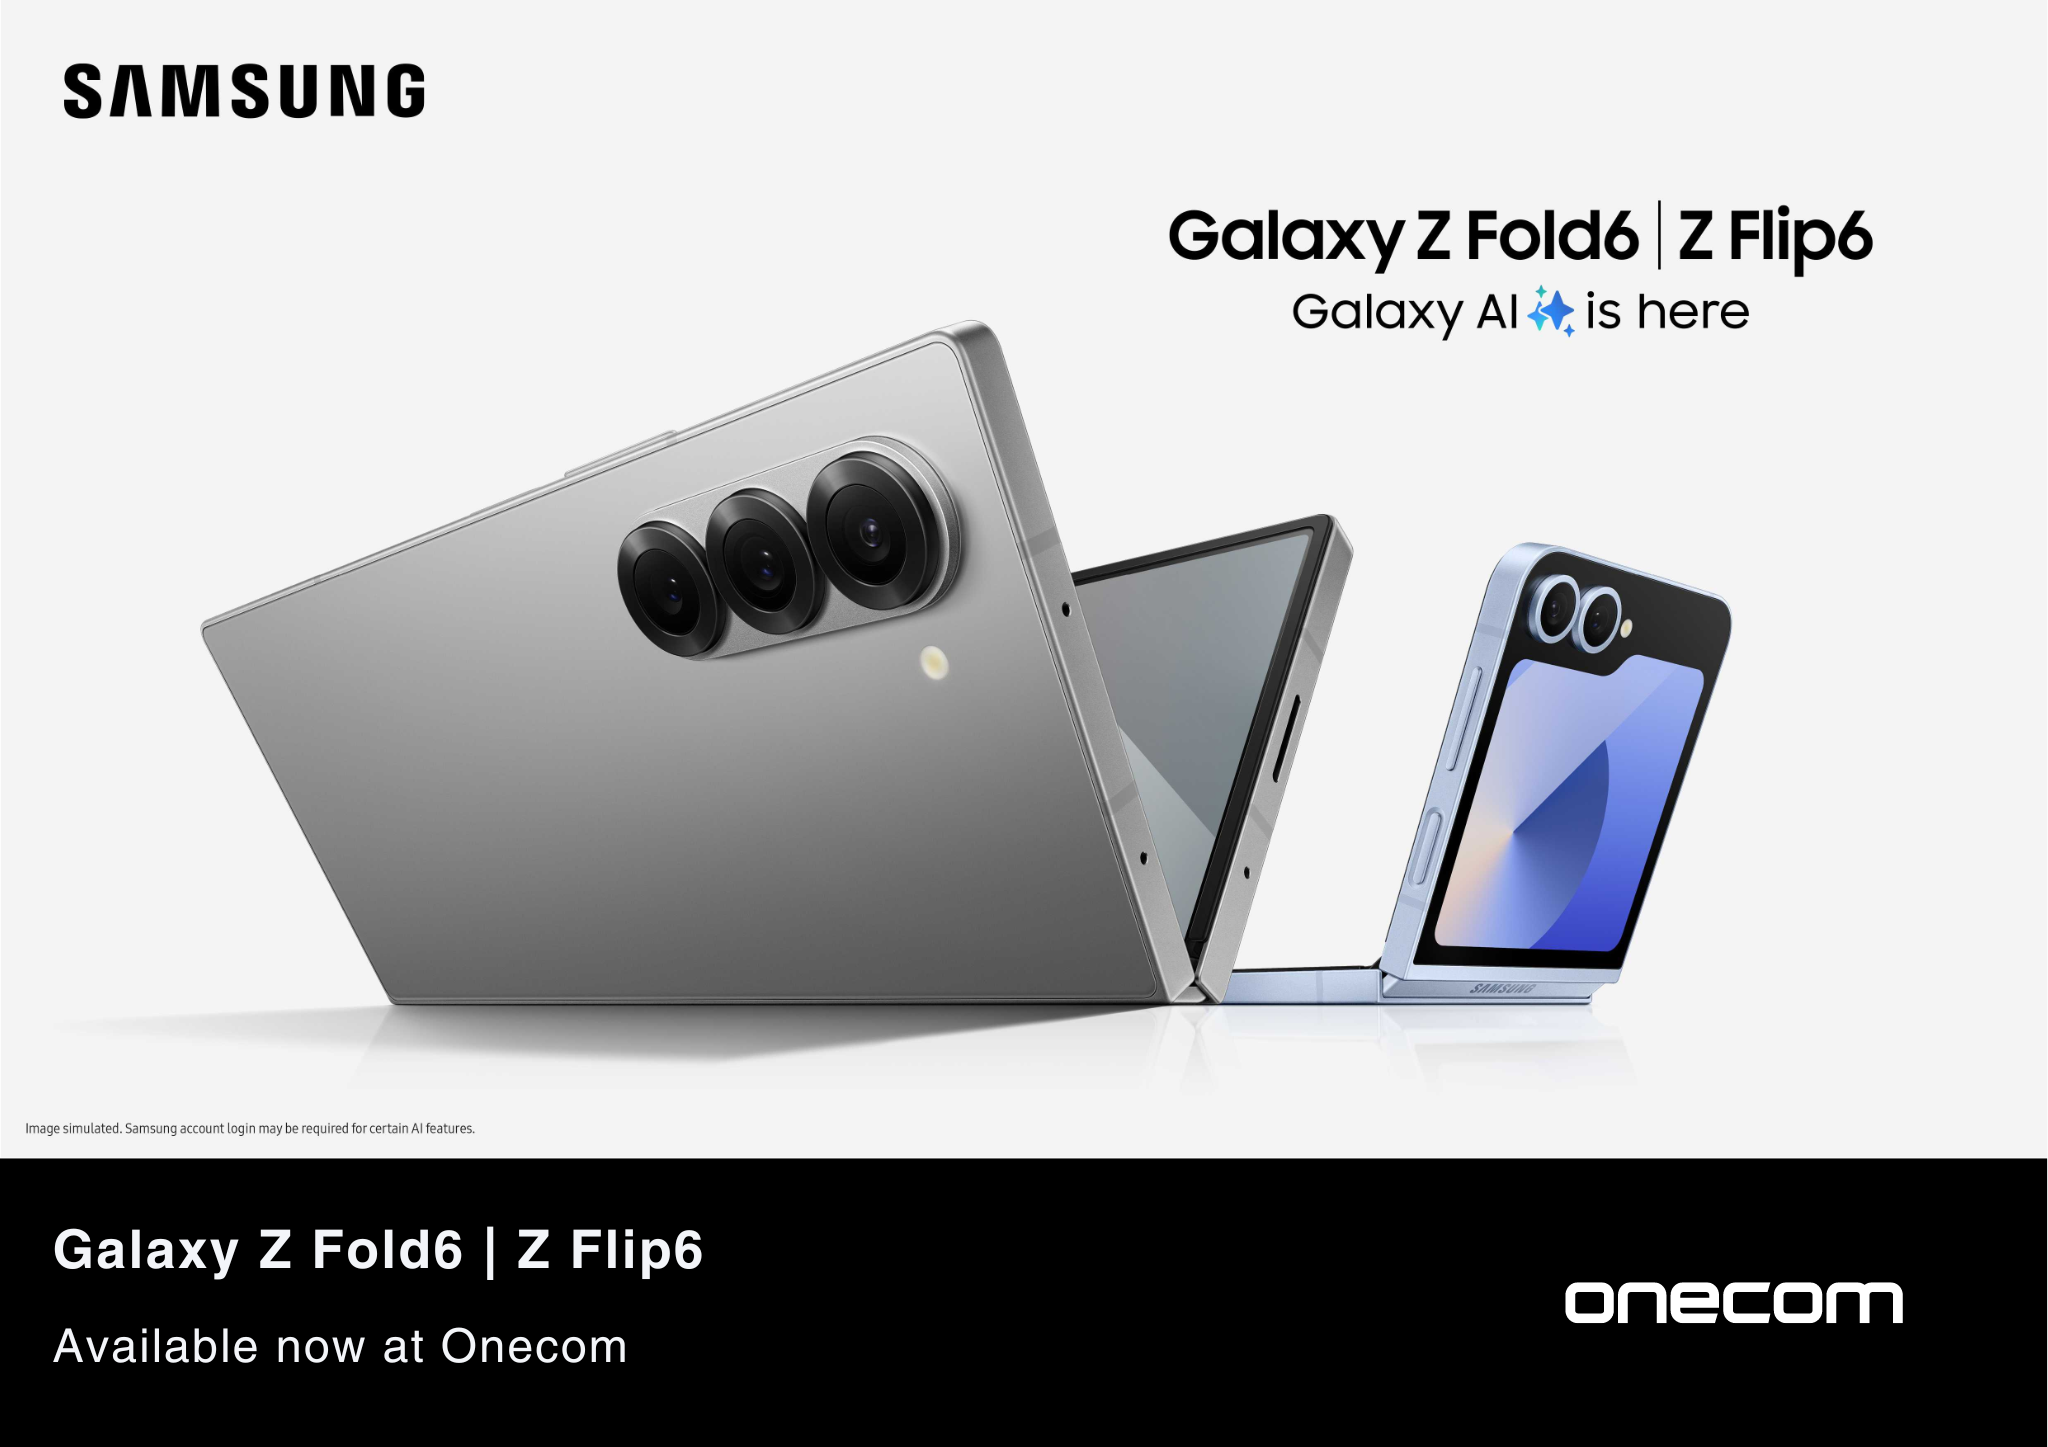 Meet the Galaxy Z Fold6 and Z Flip6: A new era of business powered by Galaxy AI